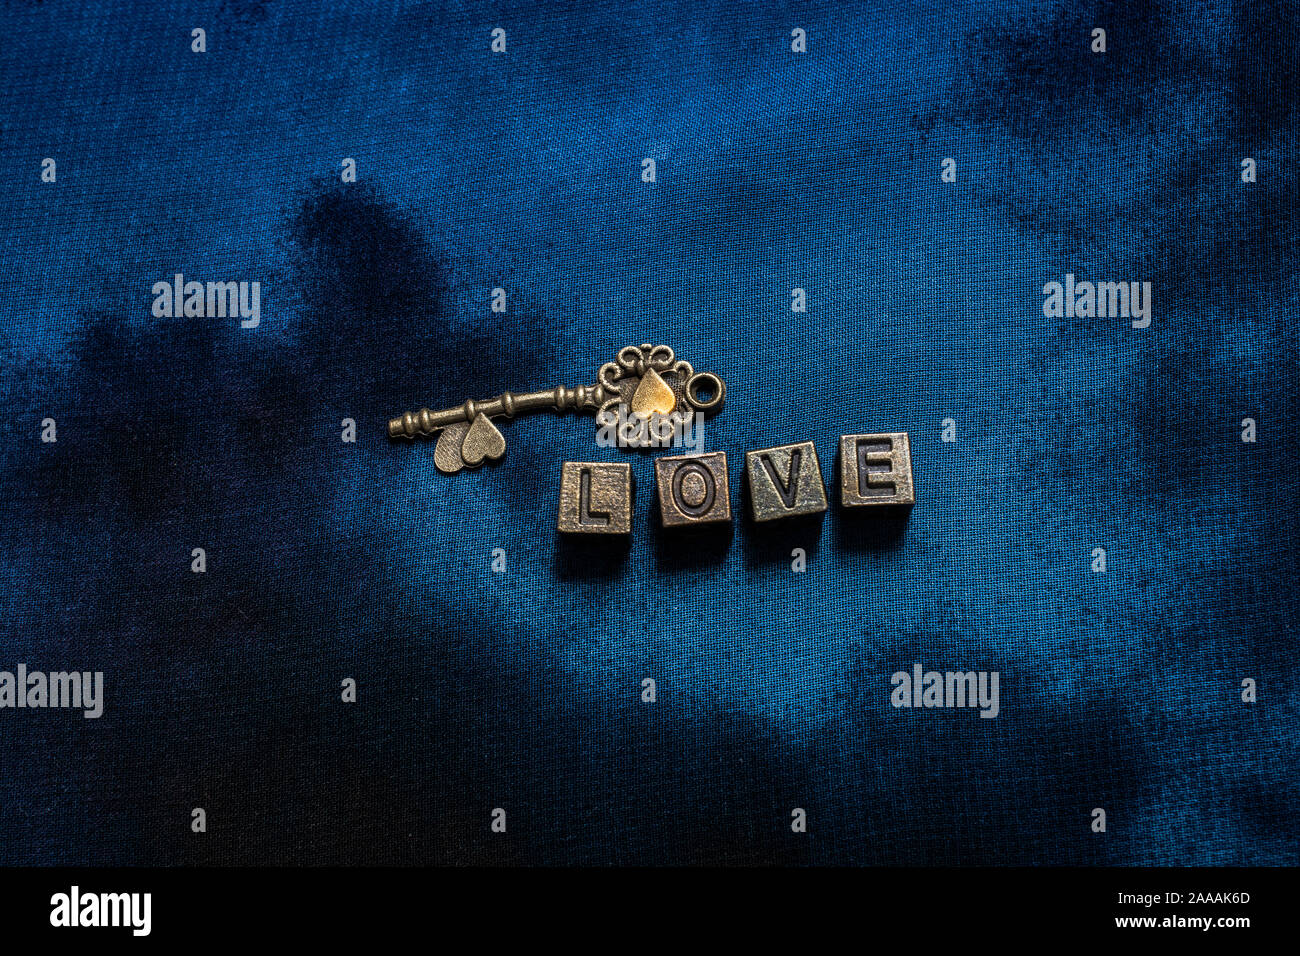 Ornamental keys around the Love wording with retro metal letters Stock Photo